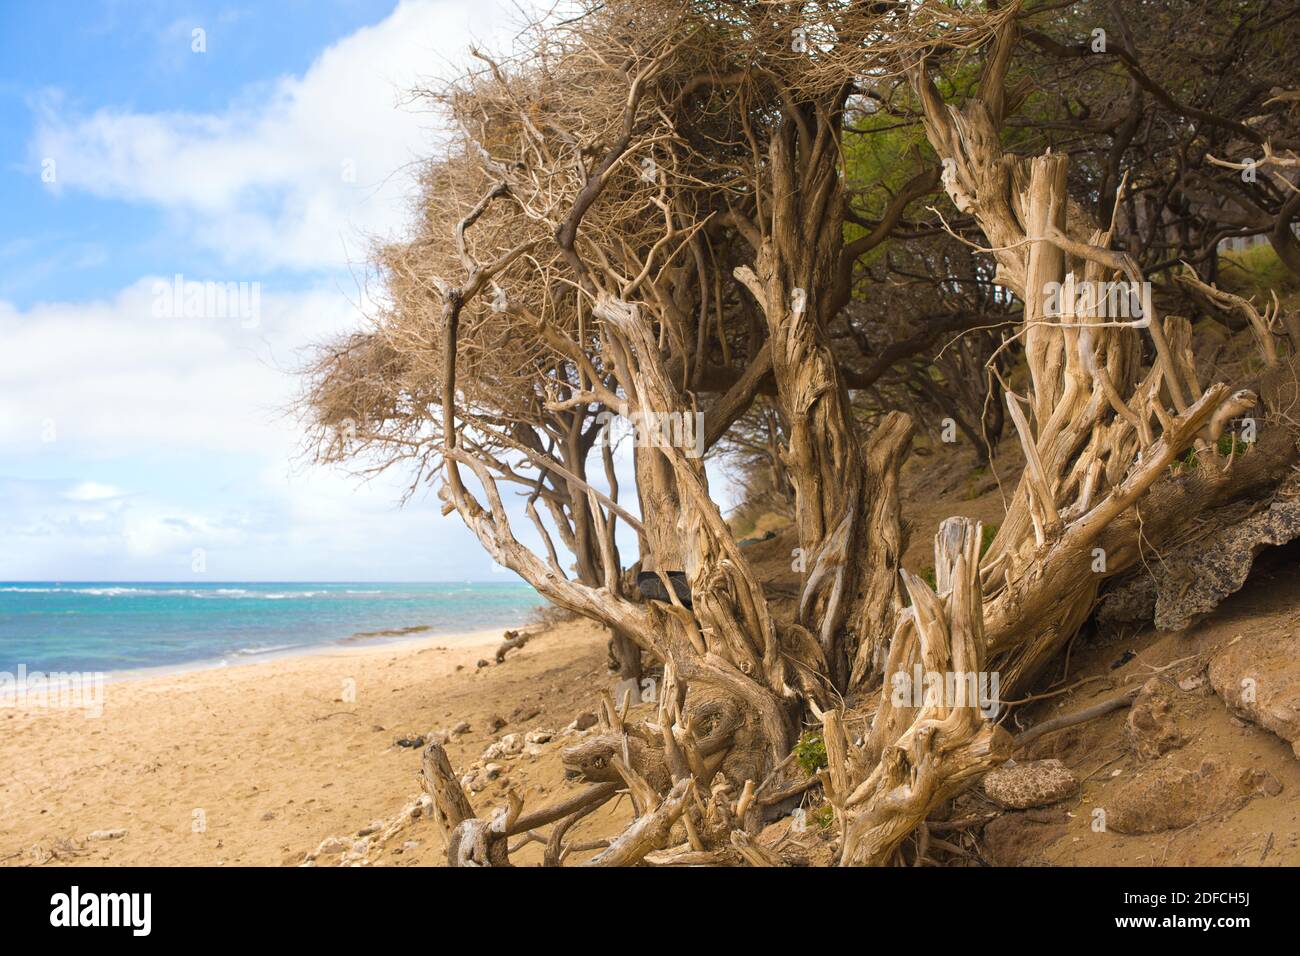 Gnarled and twisted trees on sandy beach along the Pacific Ocean Stock Photo